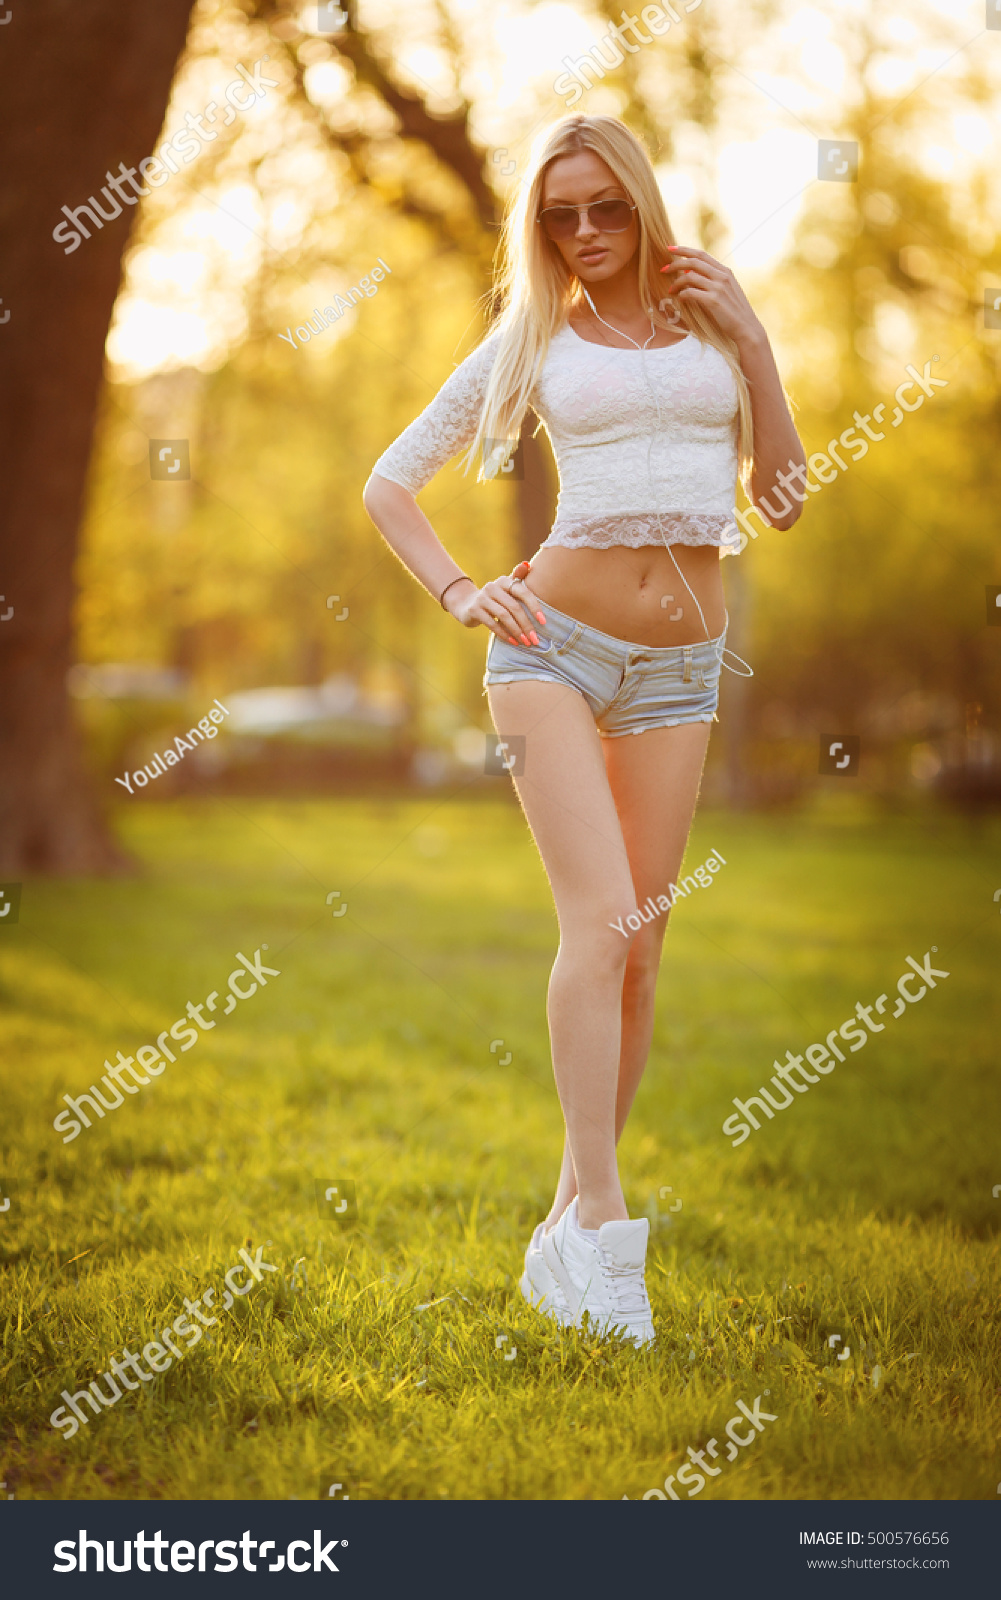 bina pandey recommends Sexy Blonde Short Shorts